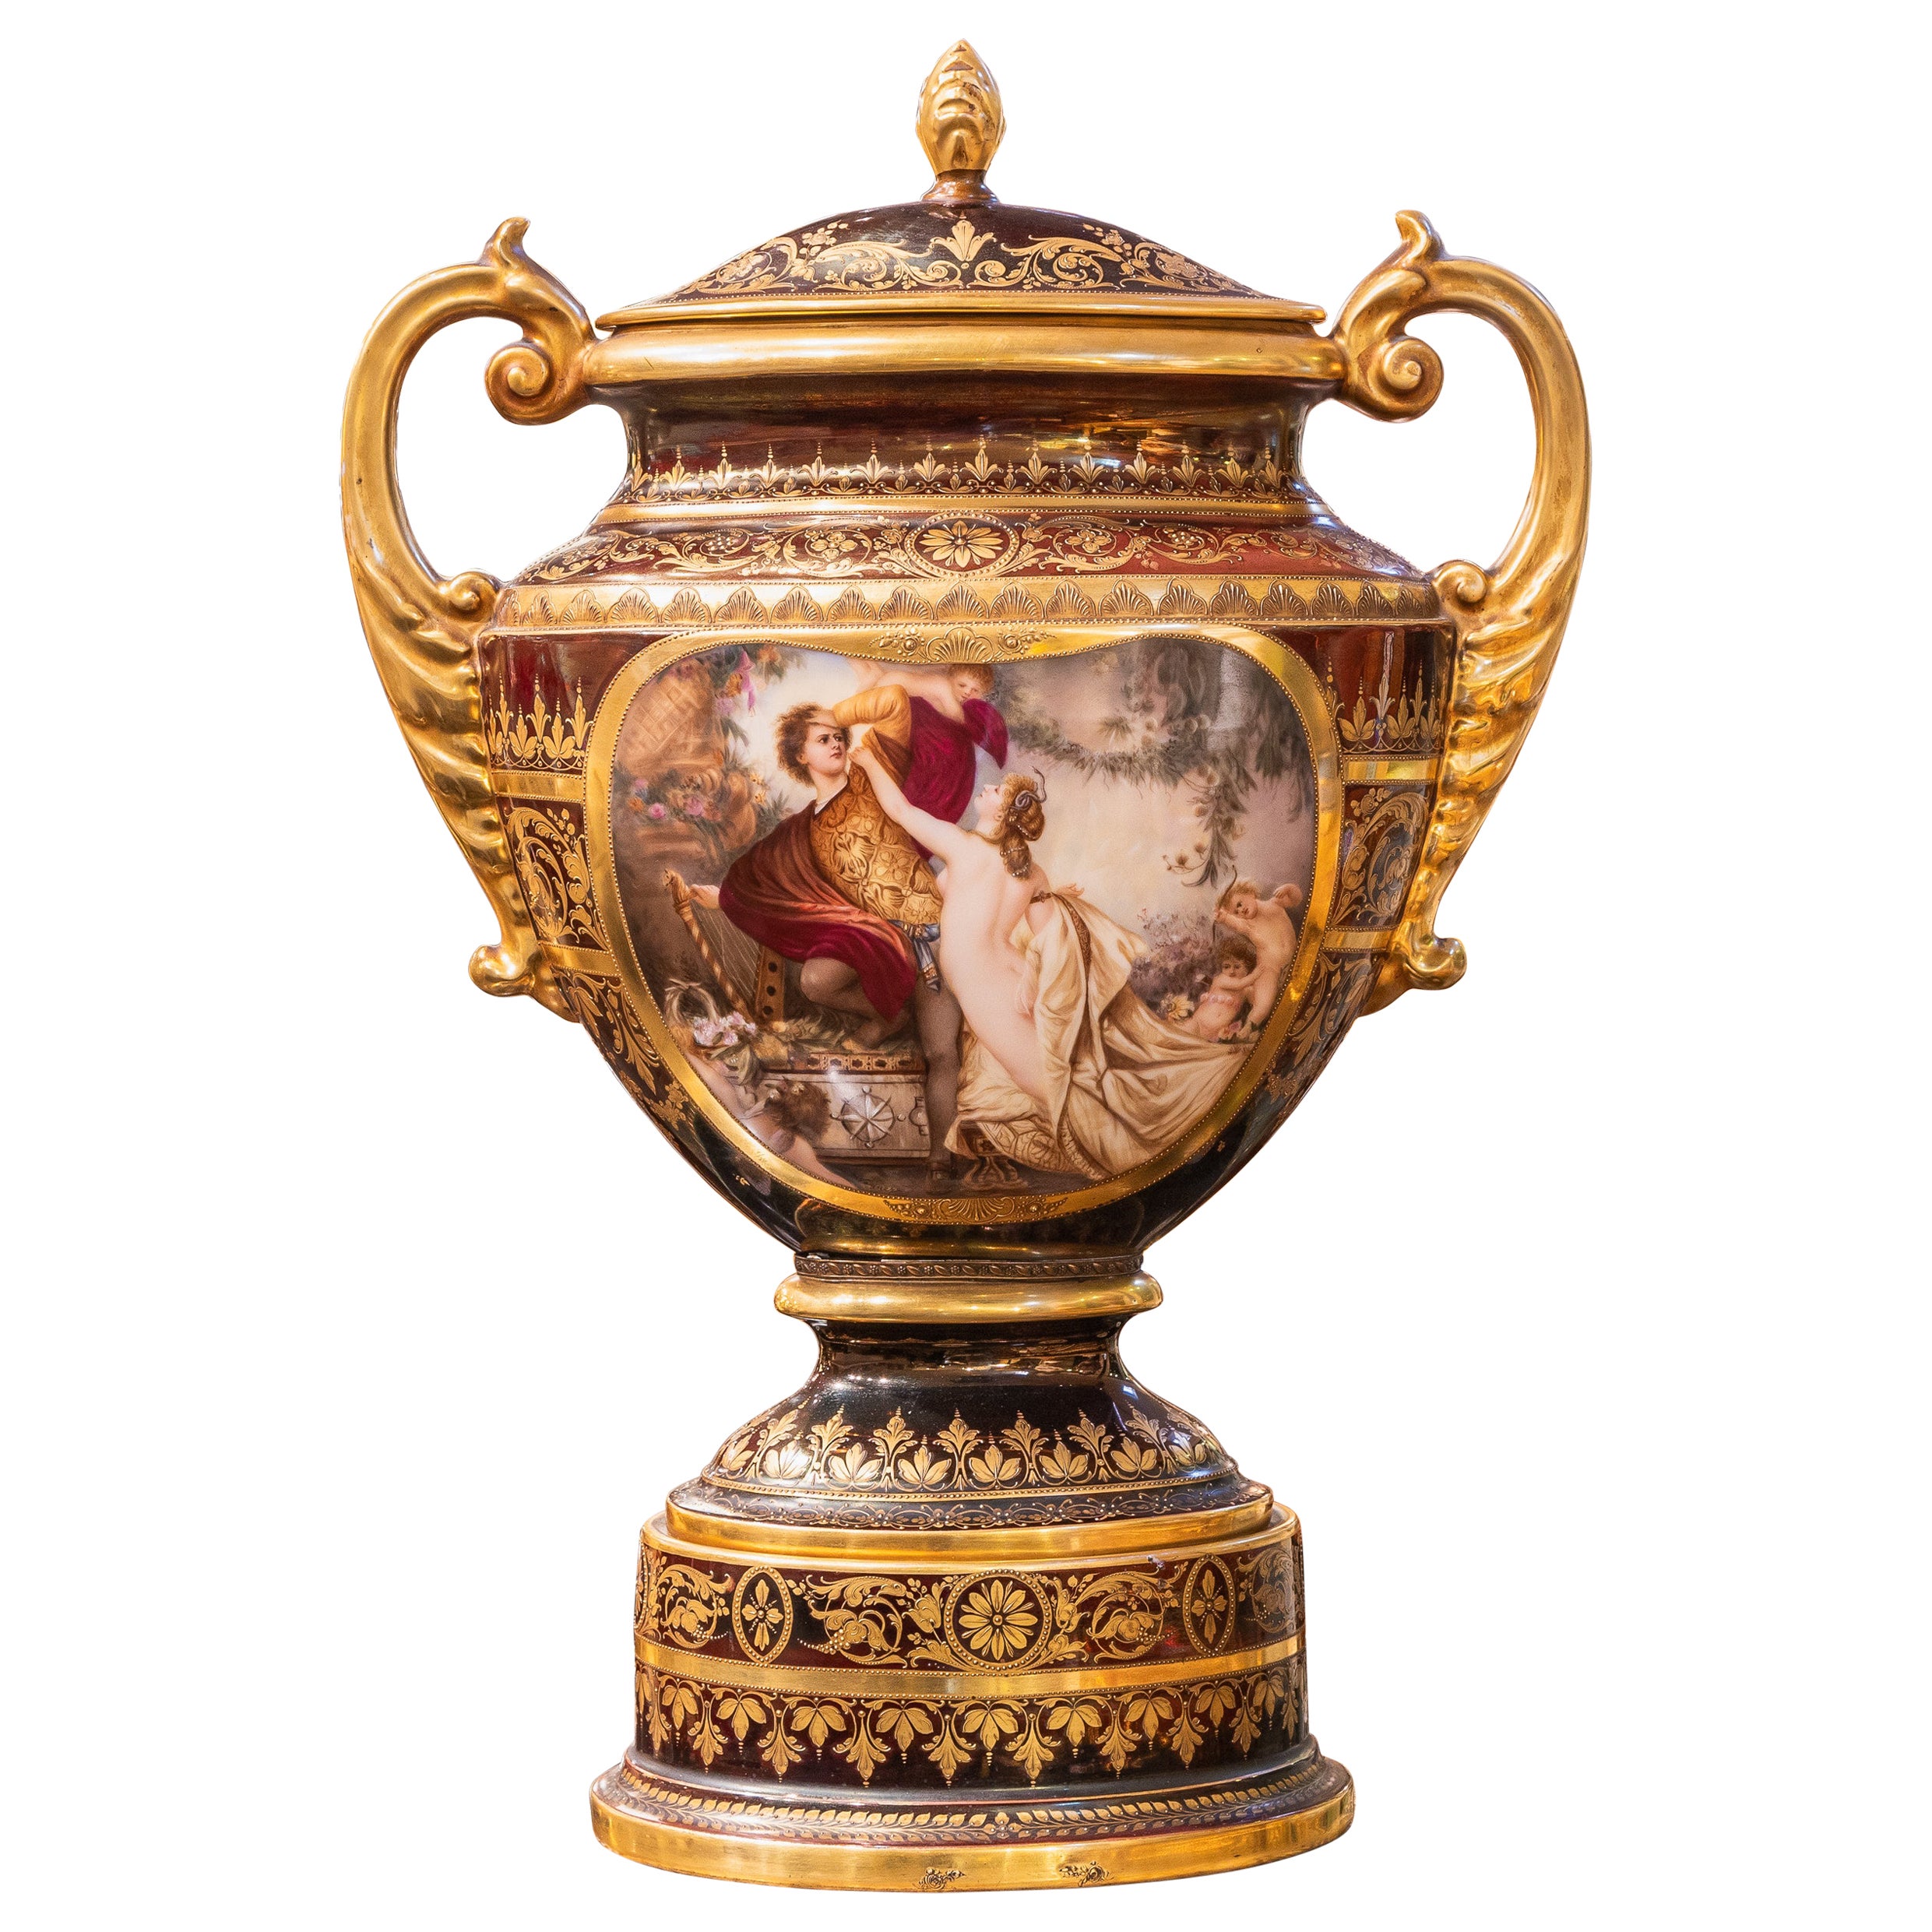 A very fine Palatial 19th century Royal Vienna porcelain urn . Signed Wagner